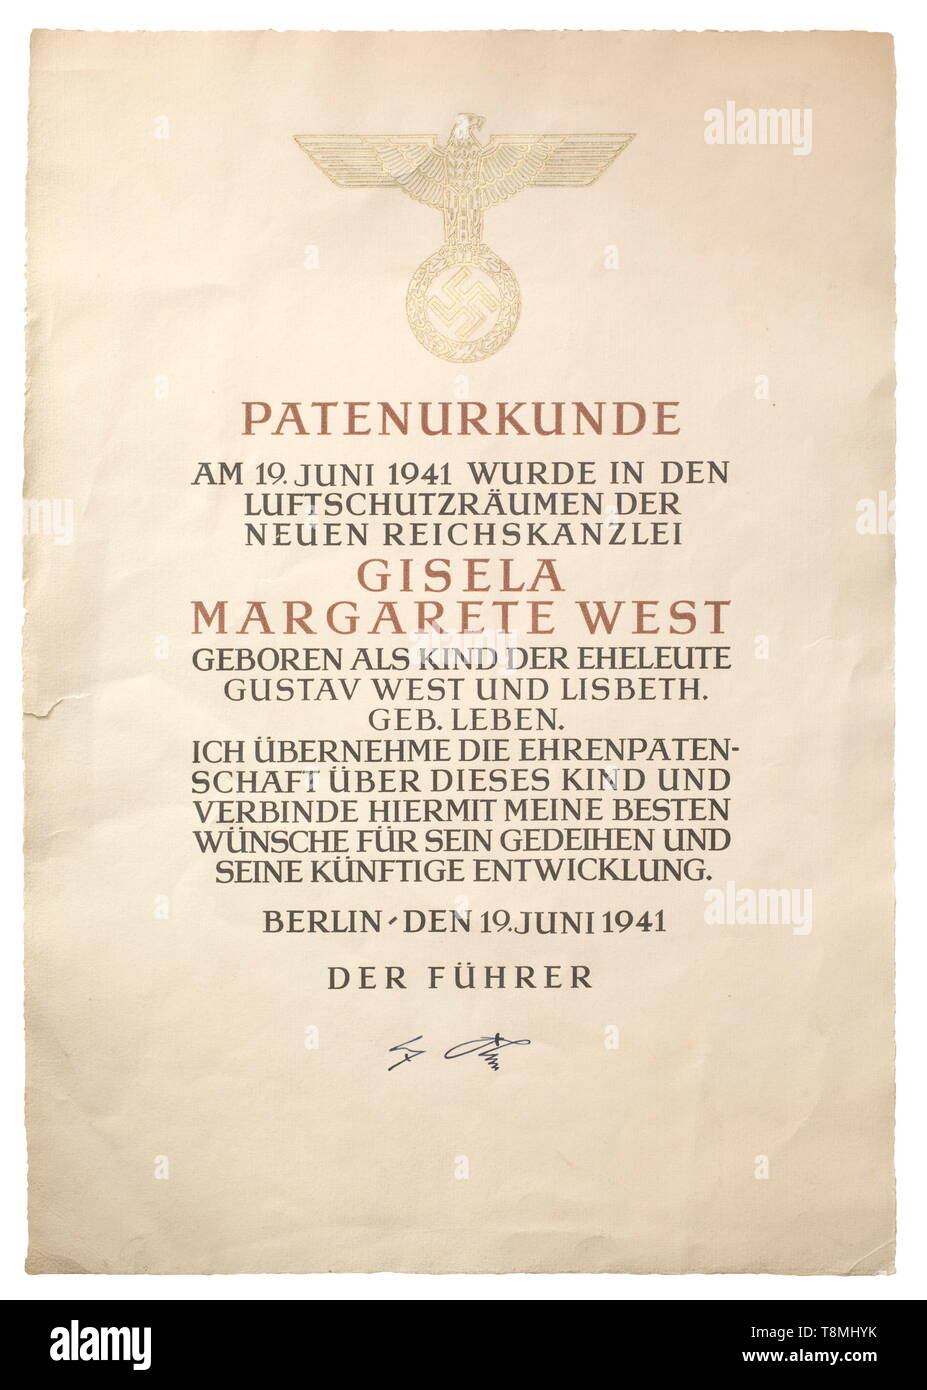 Adolf Hitler - a godparent document from the Reich Chancellery Large-format document, rendered in multiple-colours for the birth of Gisela Margarete West. The child of the married couple Gustav and Lisbeth West was born on 19 june 1941 in the air raid shelter of the New Reich Chancellery. Original signature of Adolf Hitler at the bottom, centrally small tear and with light signs of age. Dimensions of the document 25.5 x 35.5 cm. One of the rarest documents of the Third Reich period. historic, historical, document, documents, certificate, certificates, NS, National Socialism, Editorial-Use-Only Stock Photo